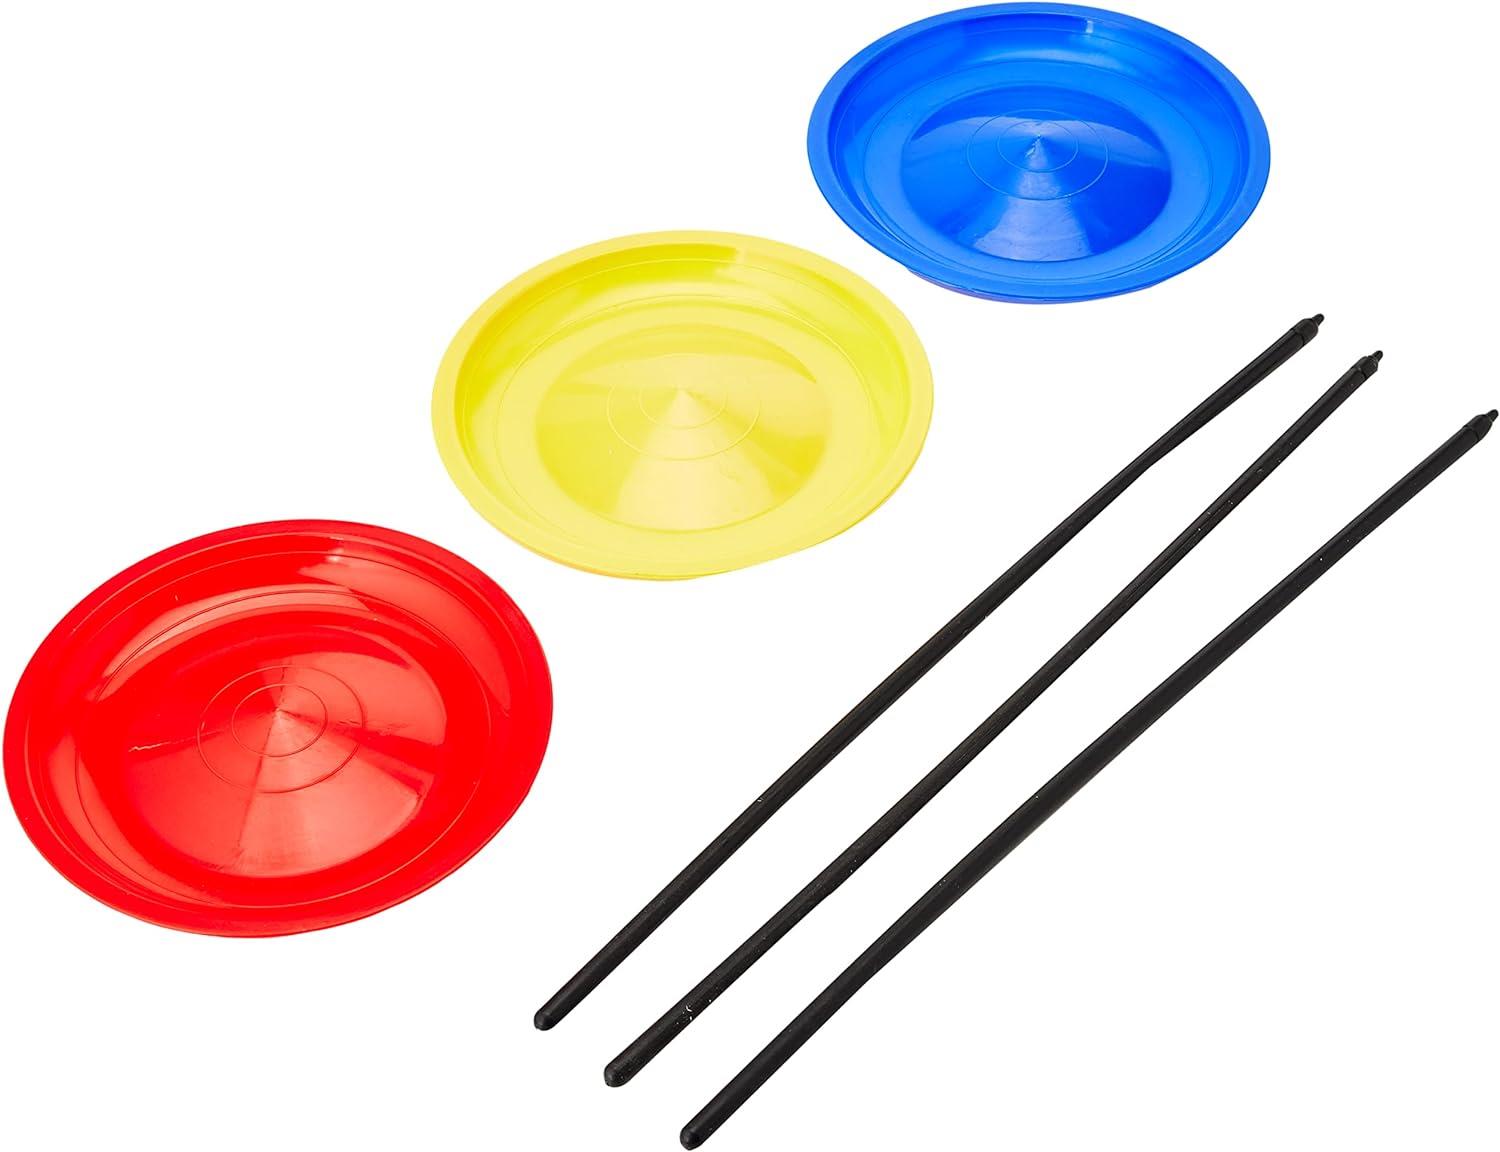 The Magic Toy Shop Toys and Games The Magic Toy Shop Spinning Plates Set